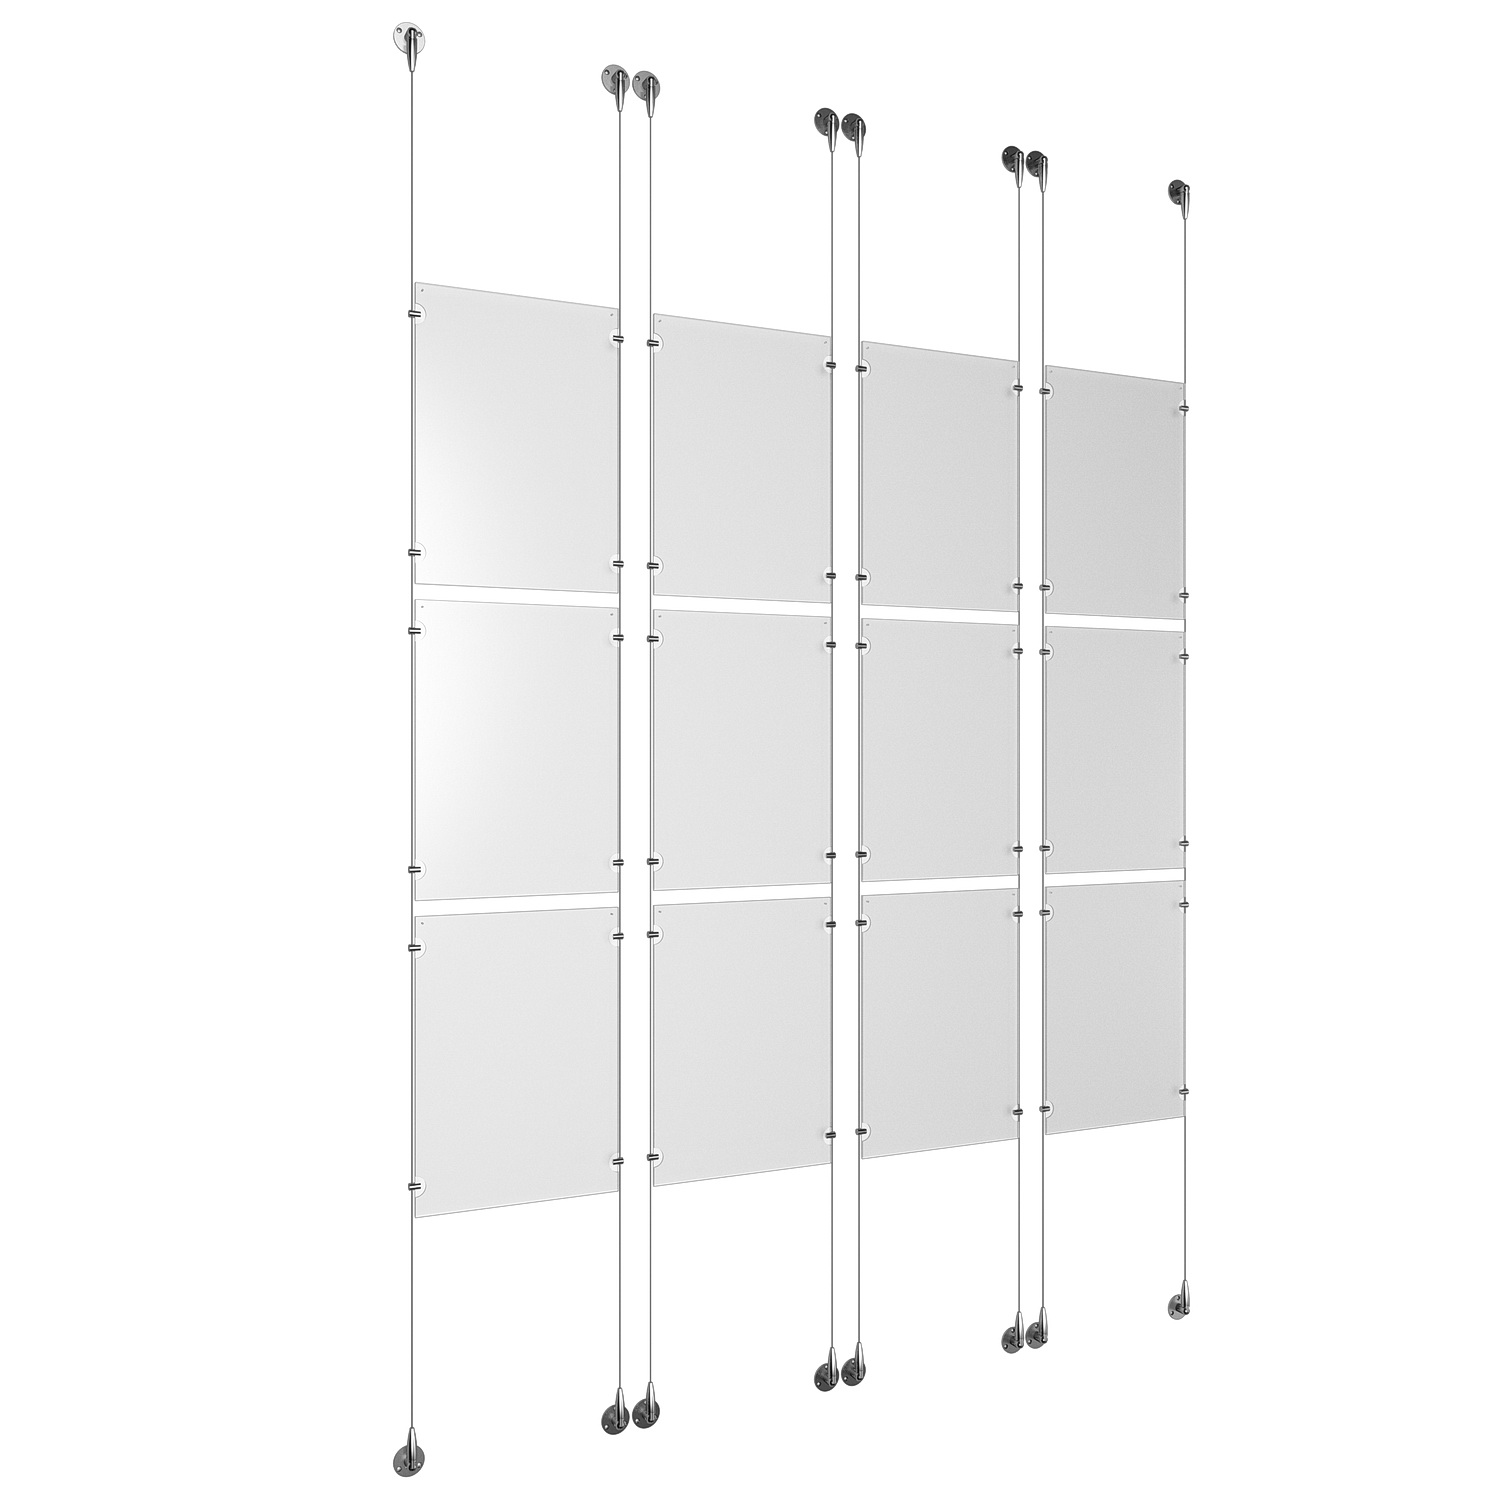 (12) 11'' Width x 17'' Height Clear Acrylic Frame & (8) Aluminum Chrome Polished Adjustable Angle Signature Cable Systems with (48) Single-Sided Panel Grippers